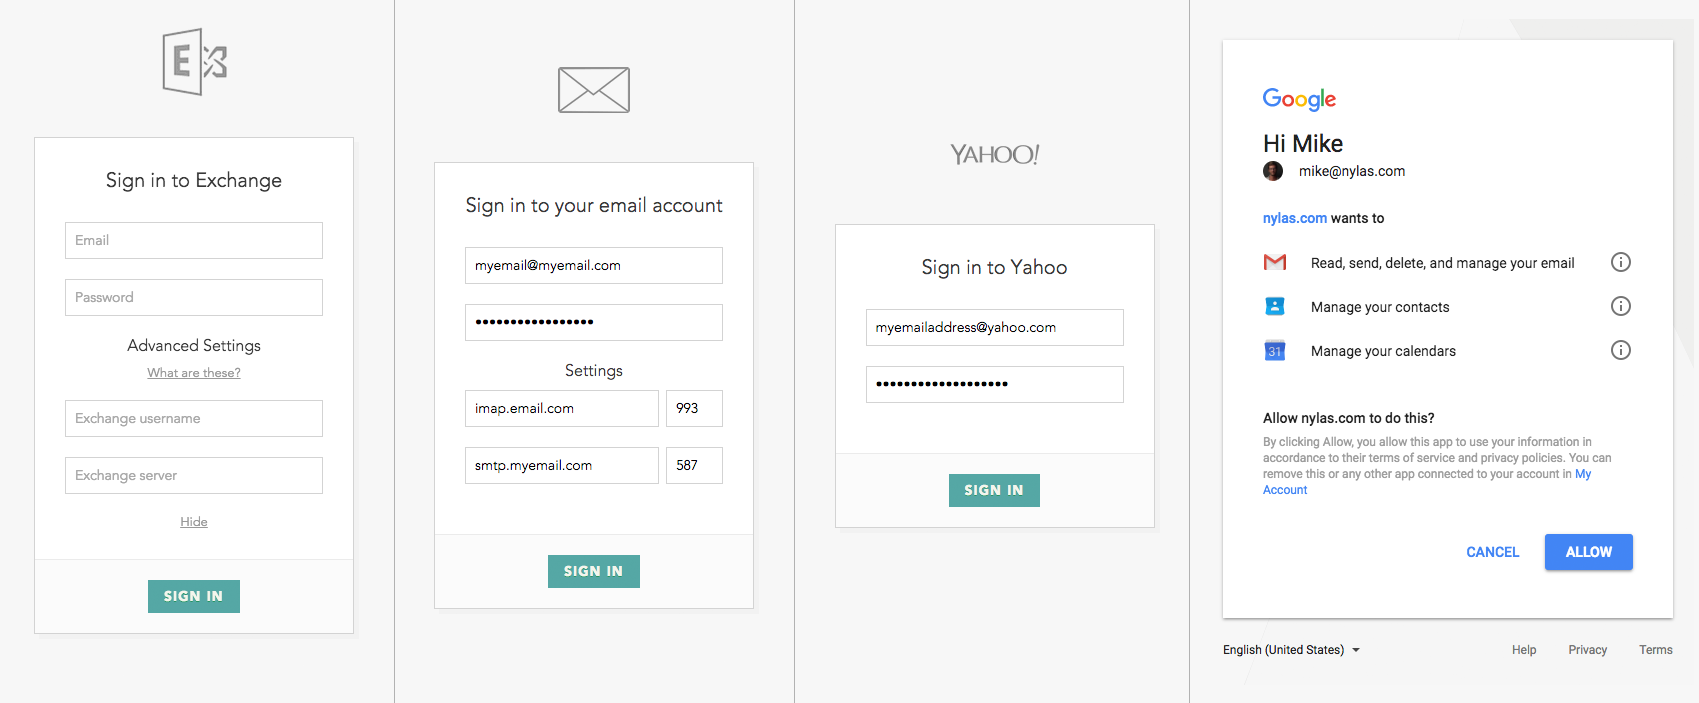 Examples of provider login screens for Microsoft Exchange, IMAP, Yahoo, and Gmail.